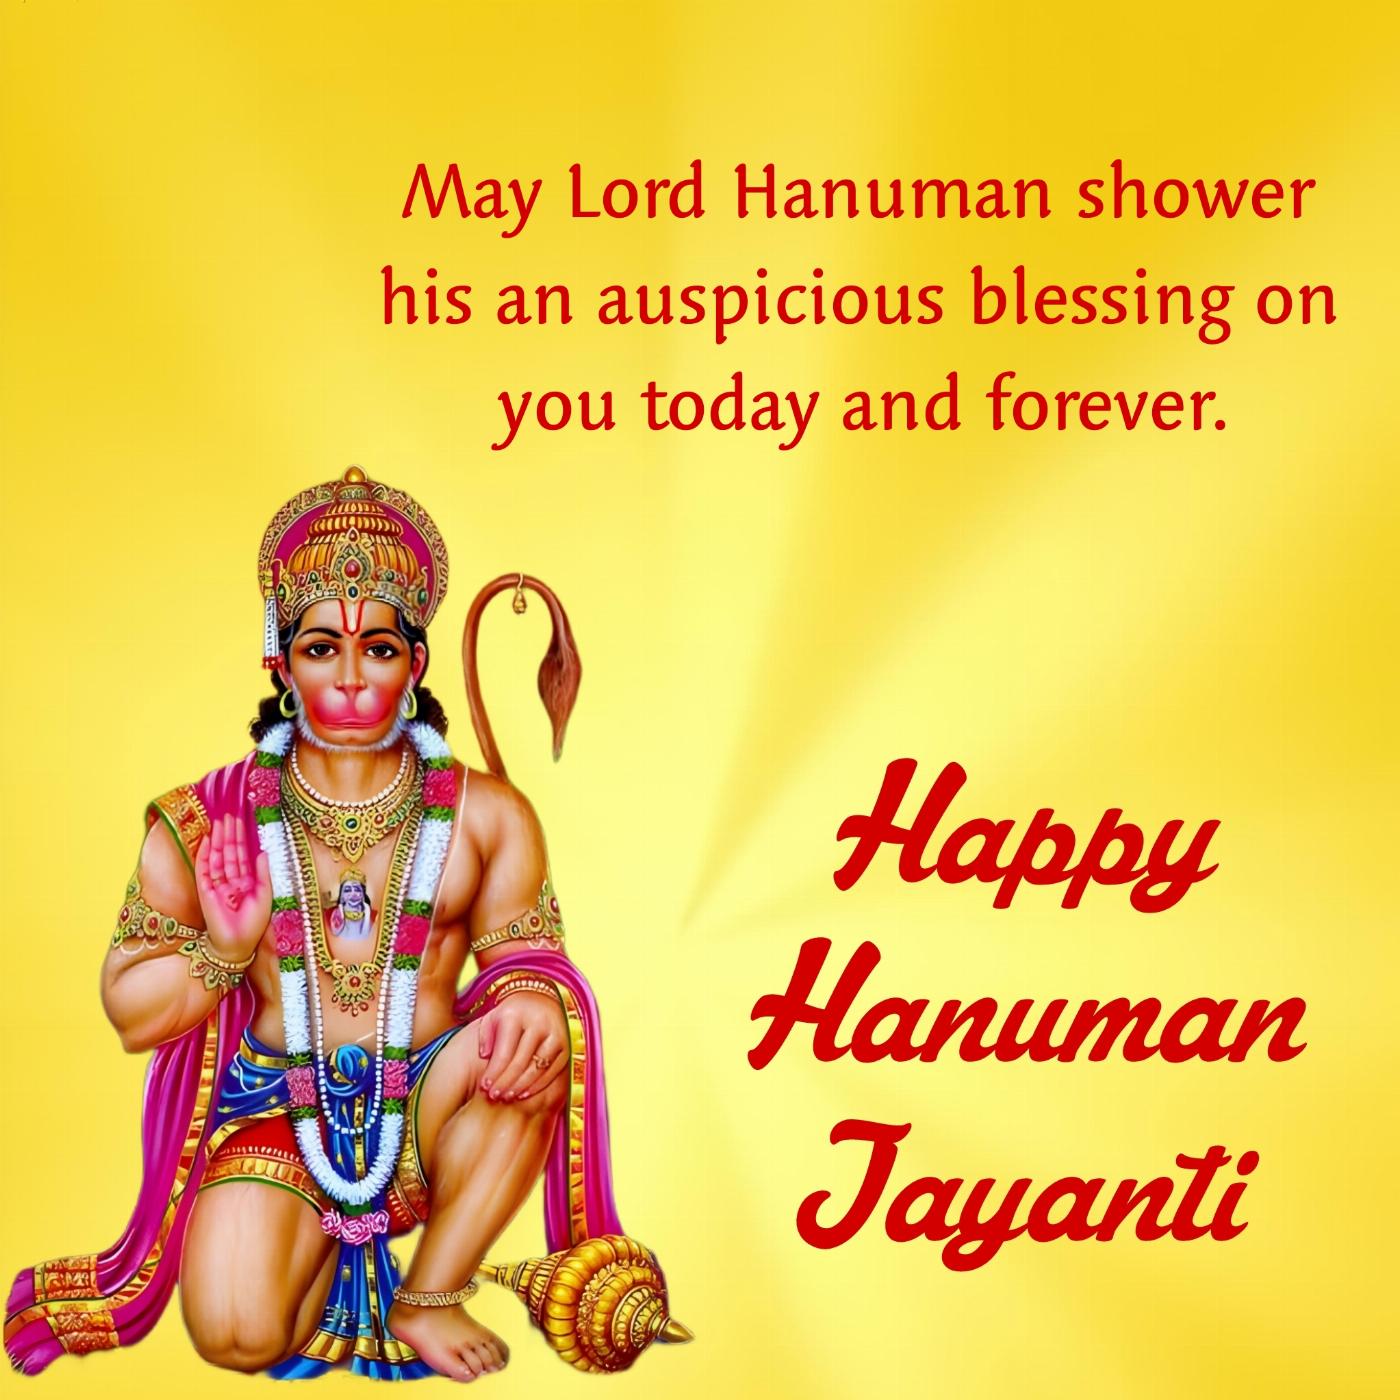 May Lord Hanuman shower is an auspicious blessing on you